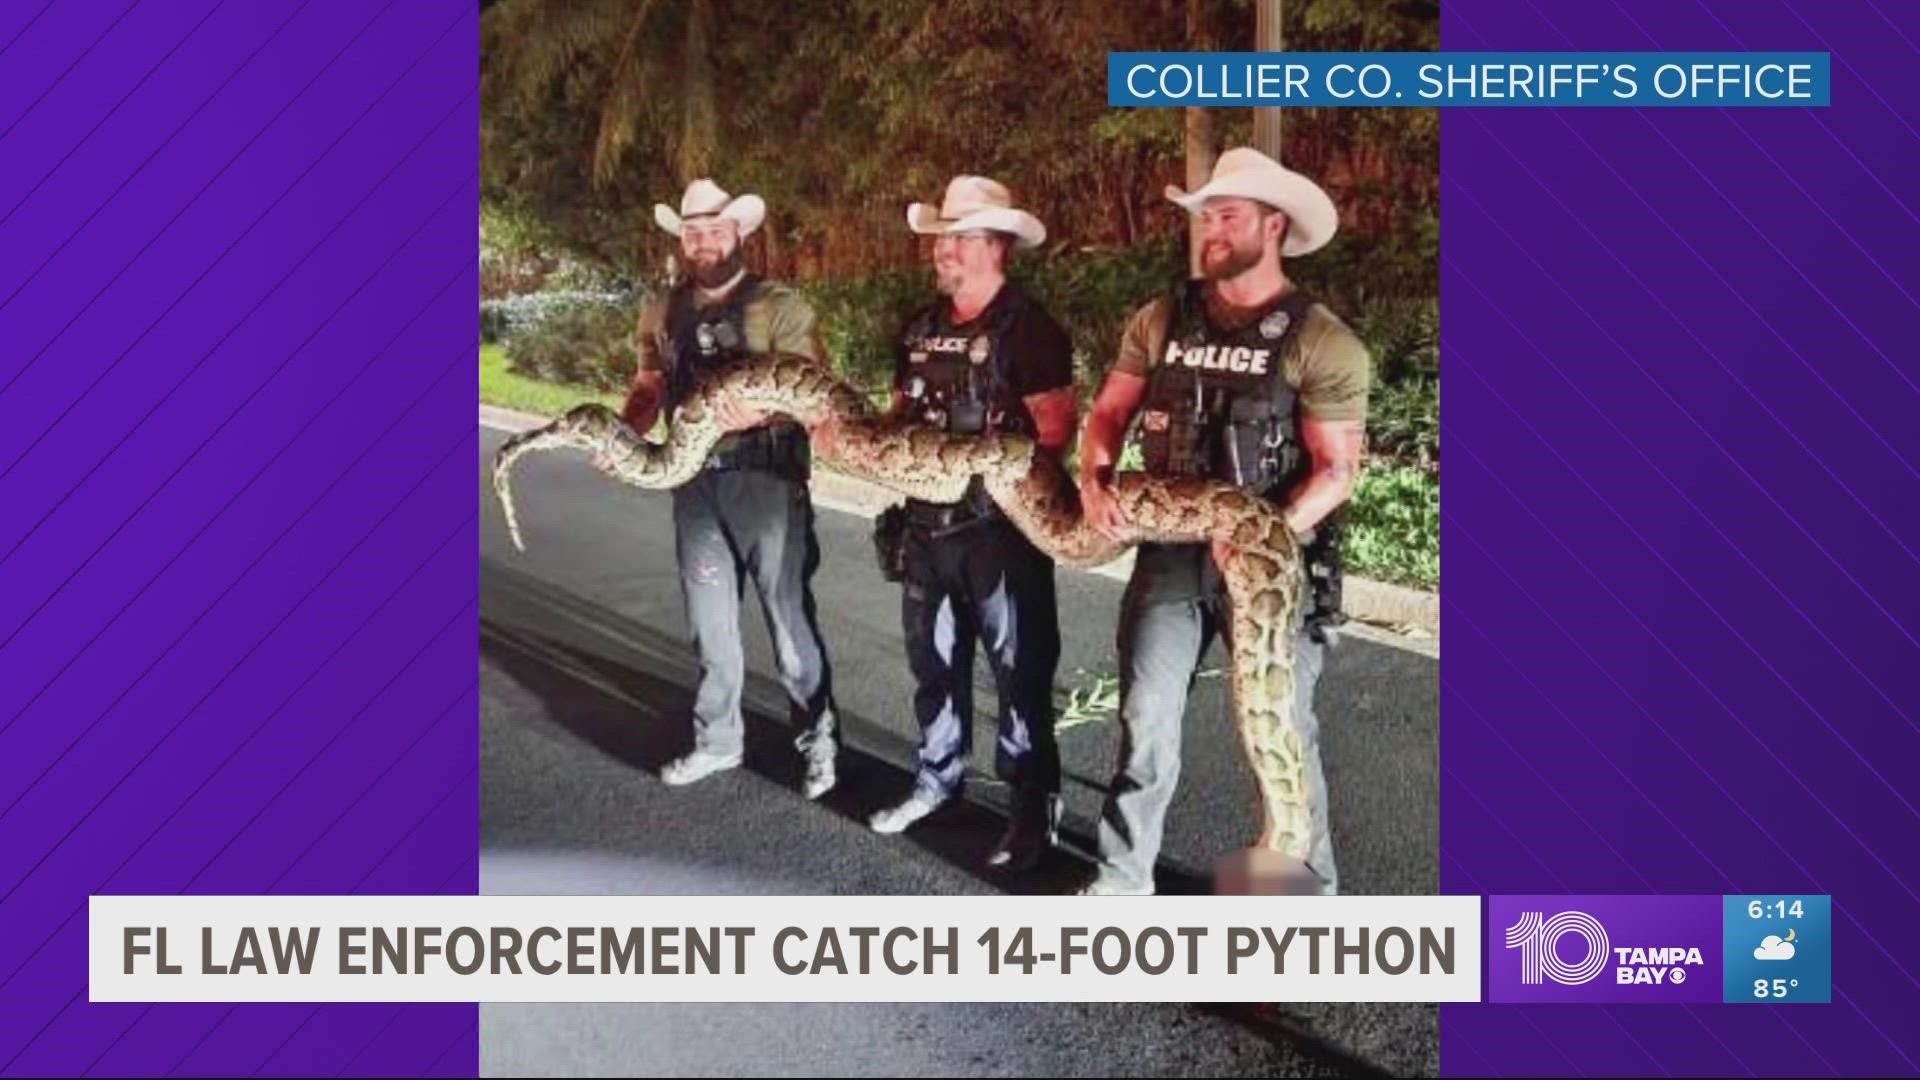 The massive reptile was caught in the bushes between two homes in an East Naples neighborhood.